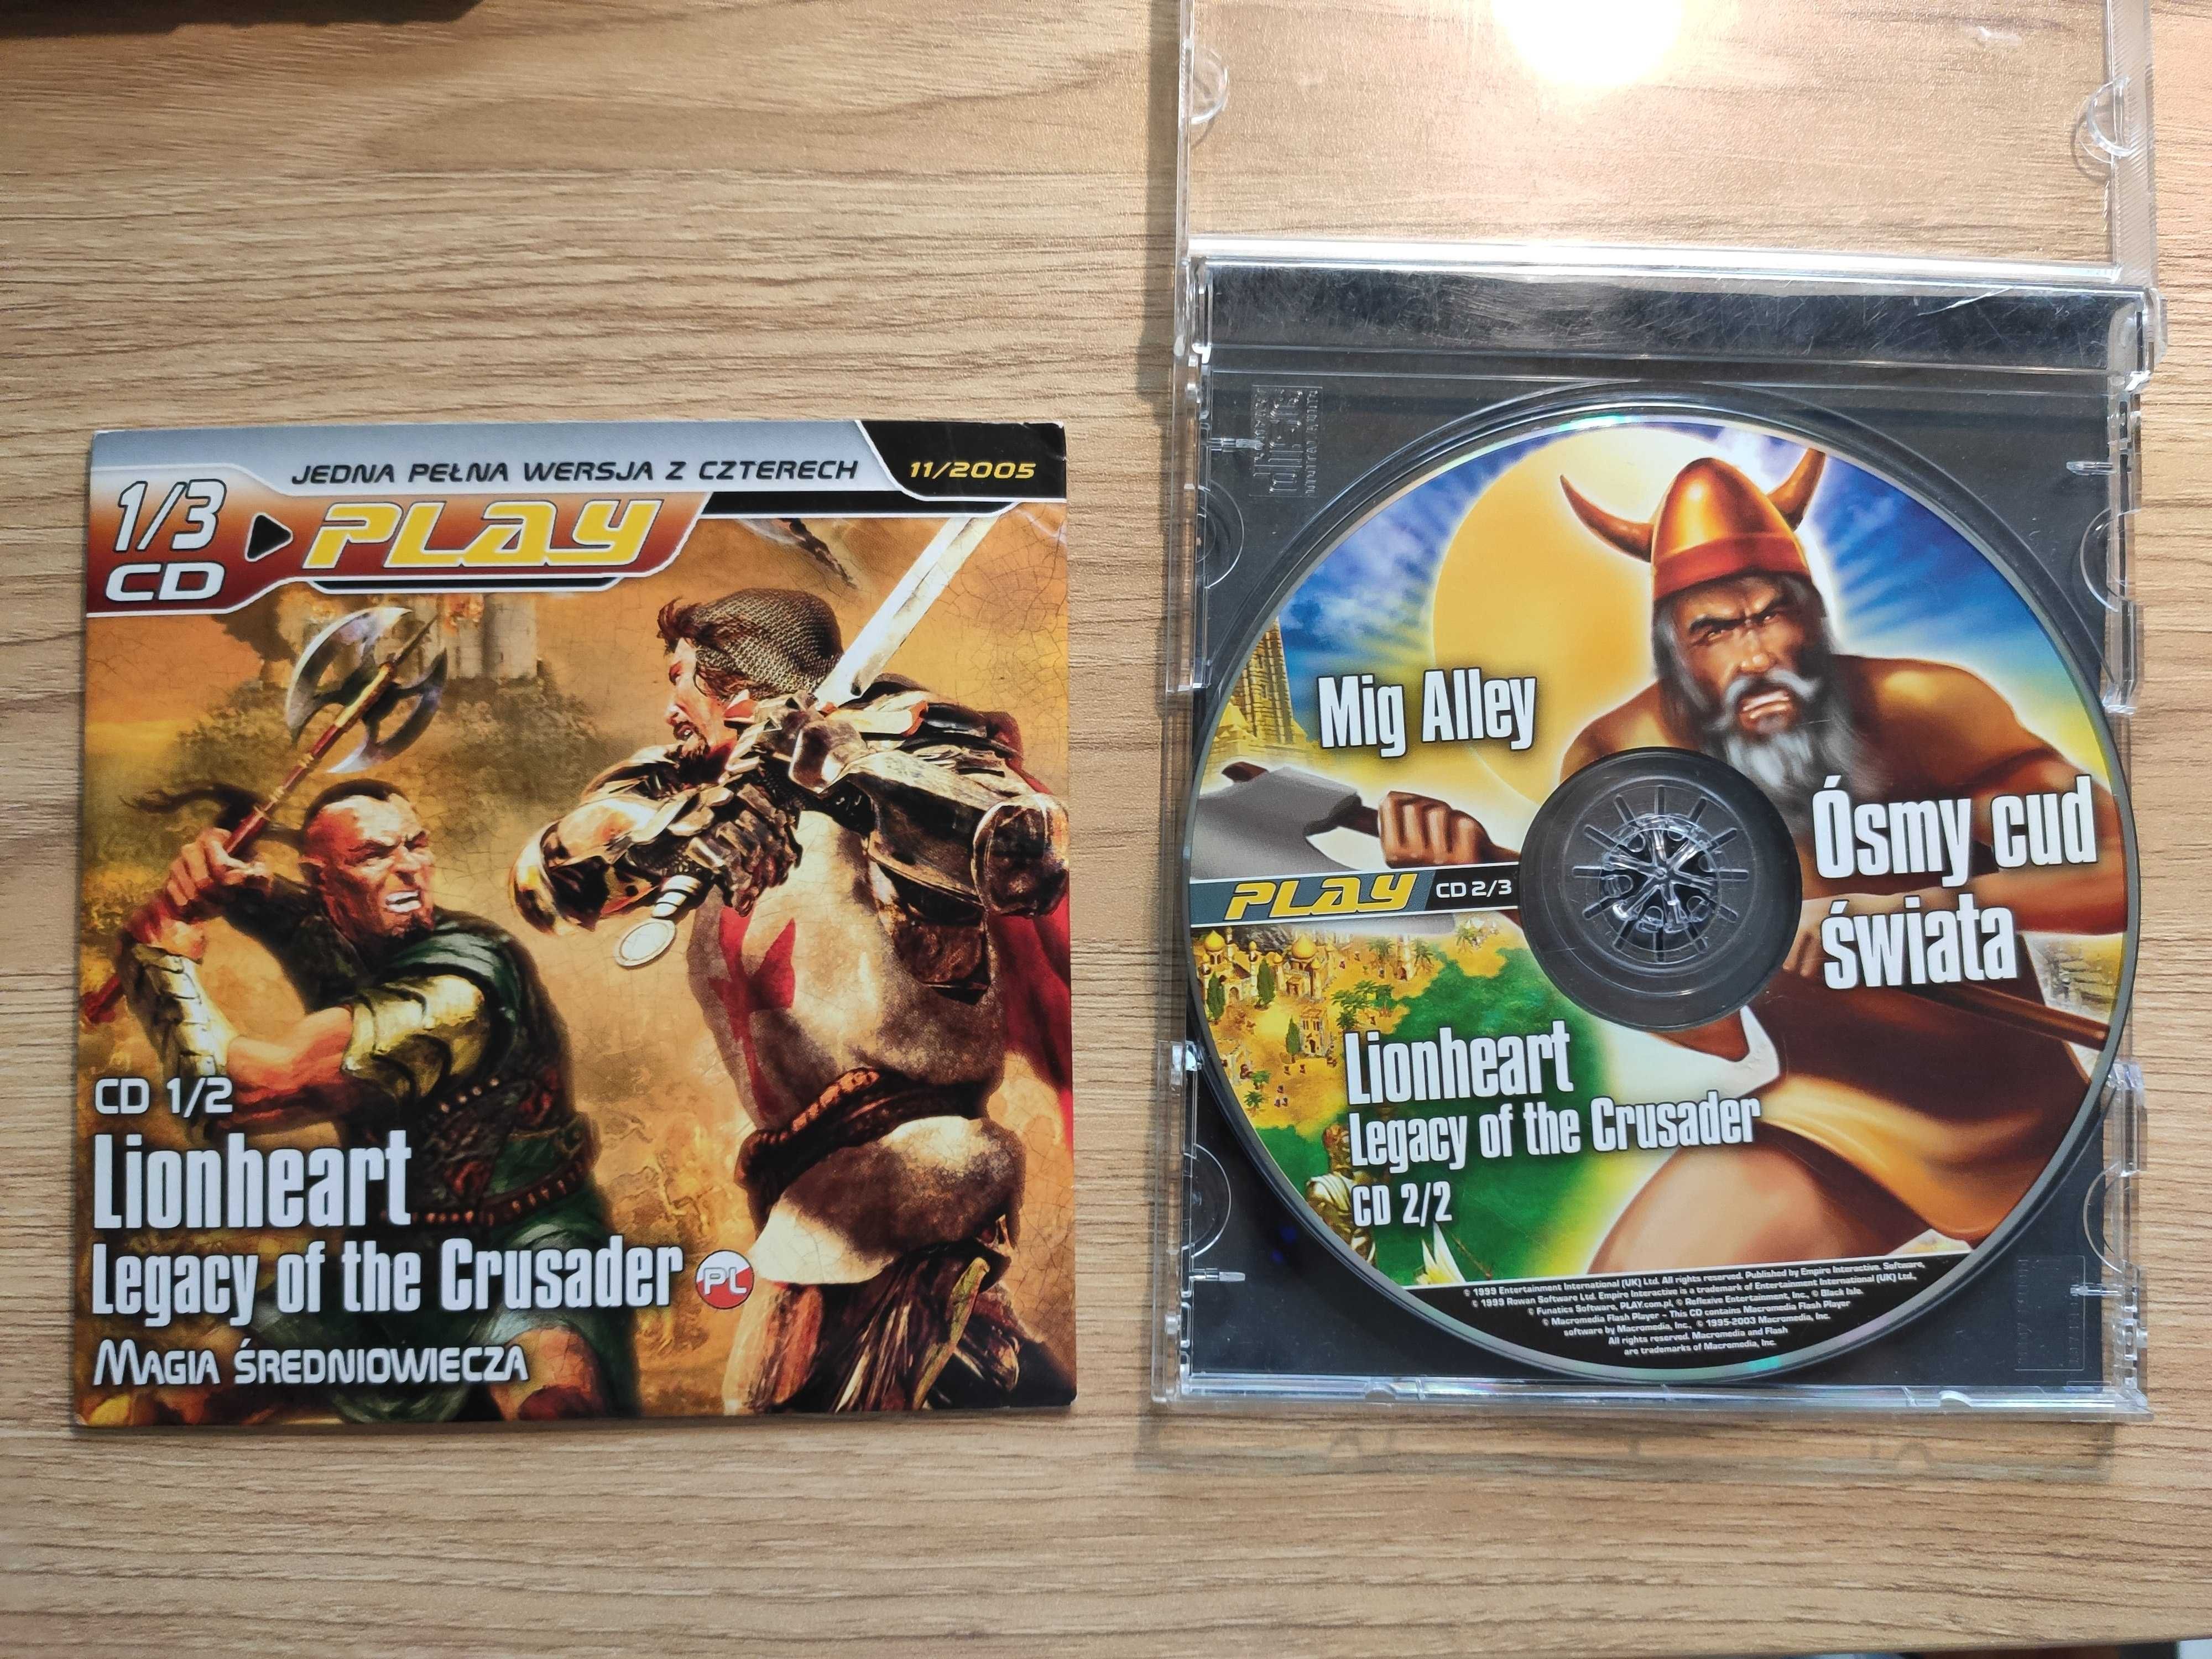 Lionheart Legacy of the crusader - gra PC PLAY 2CD